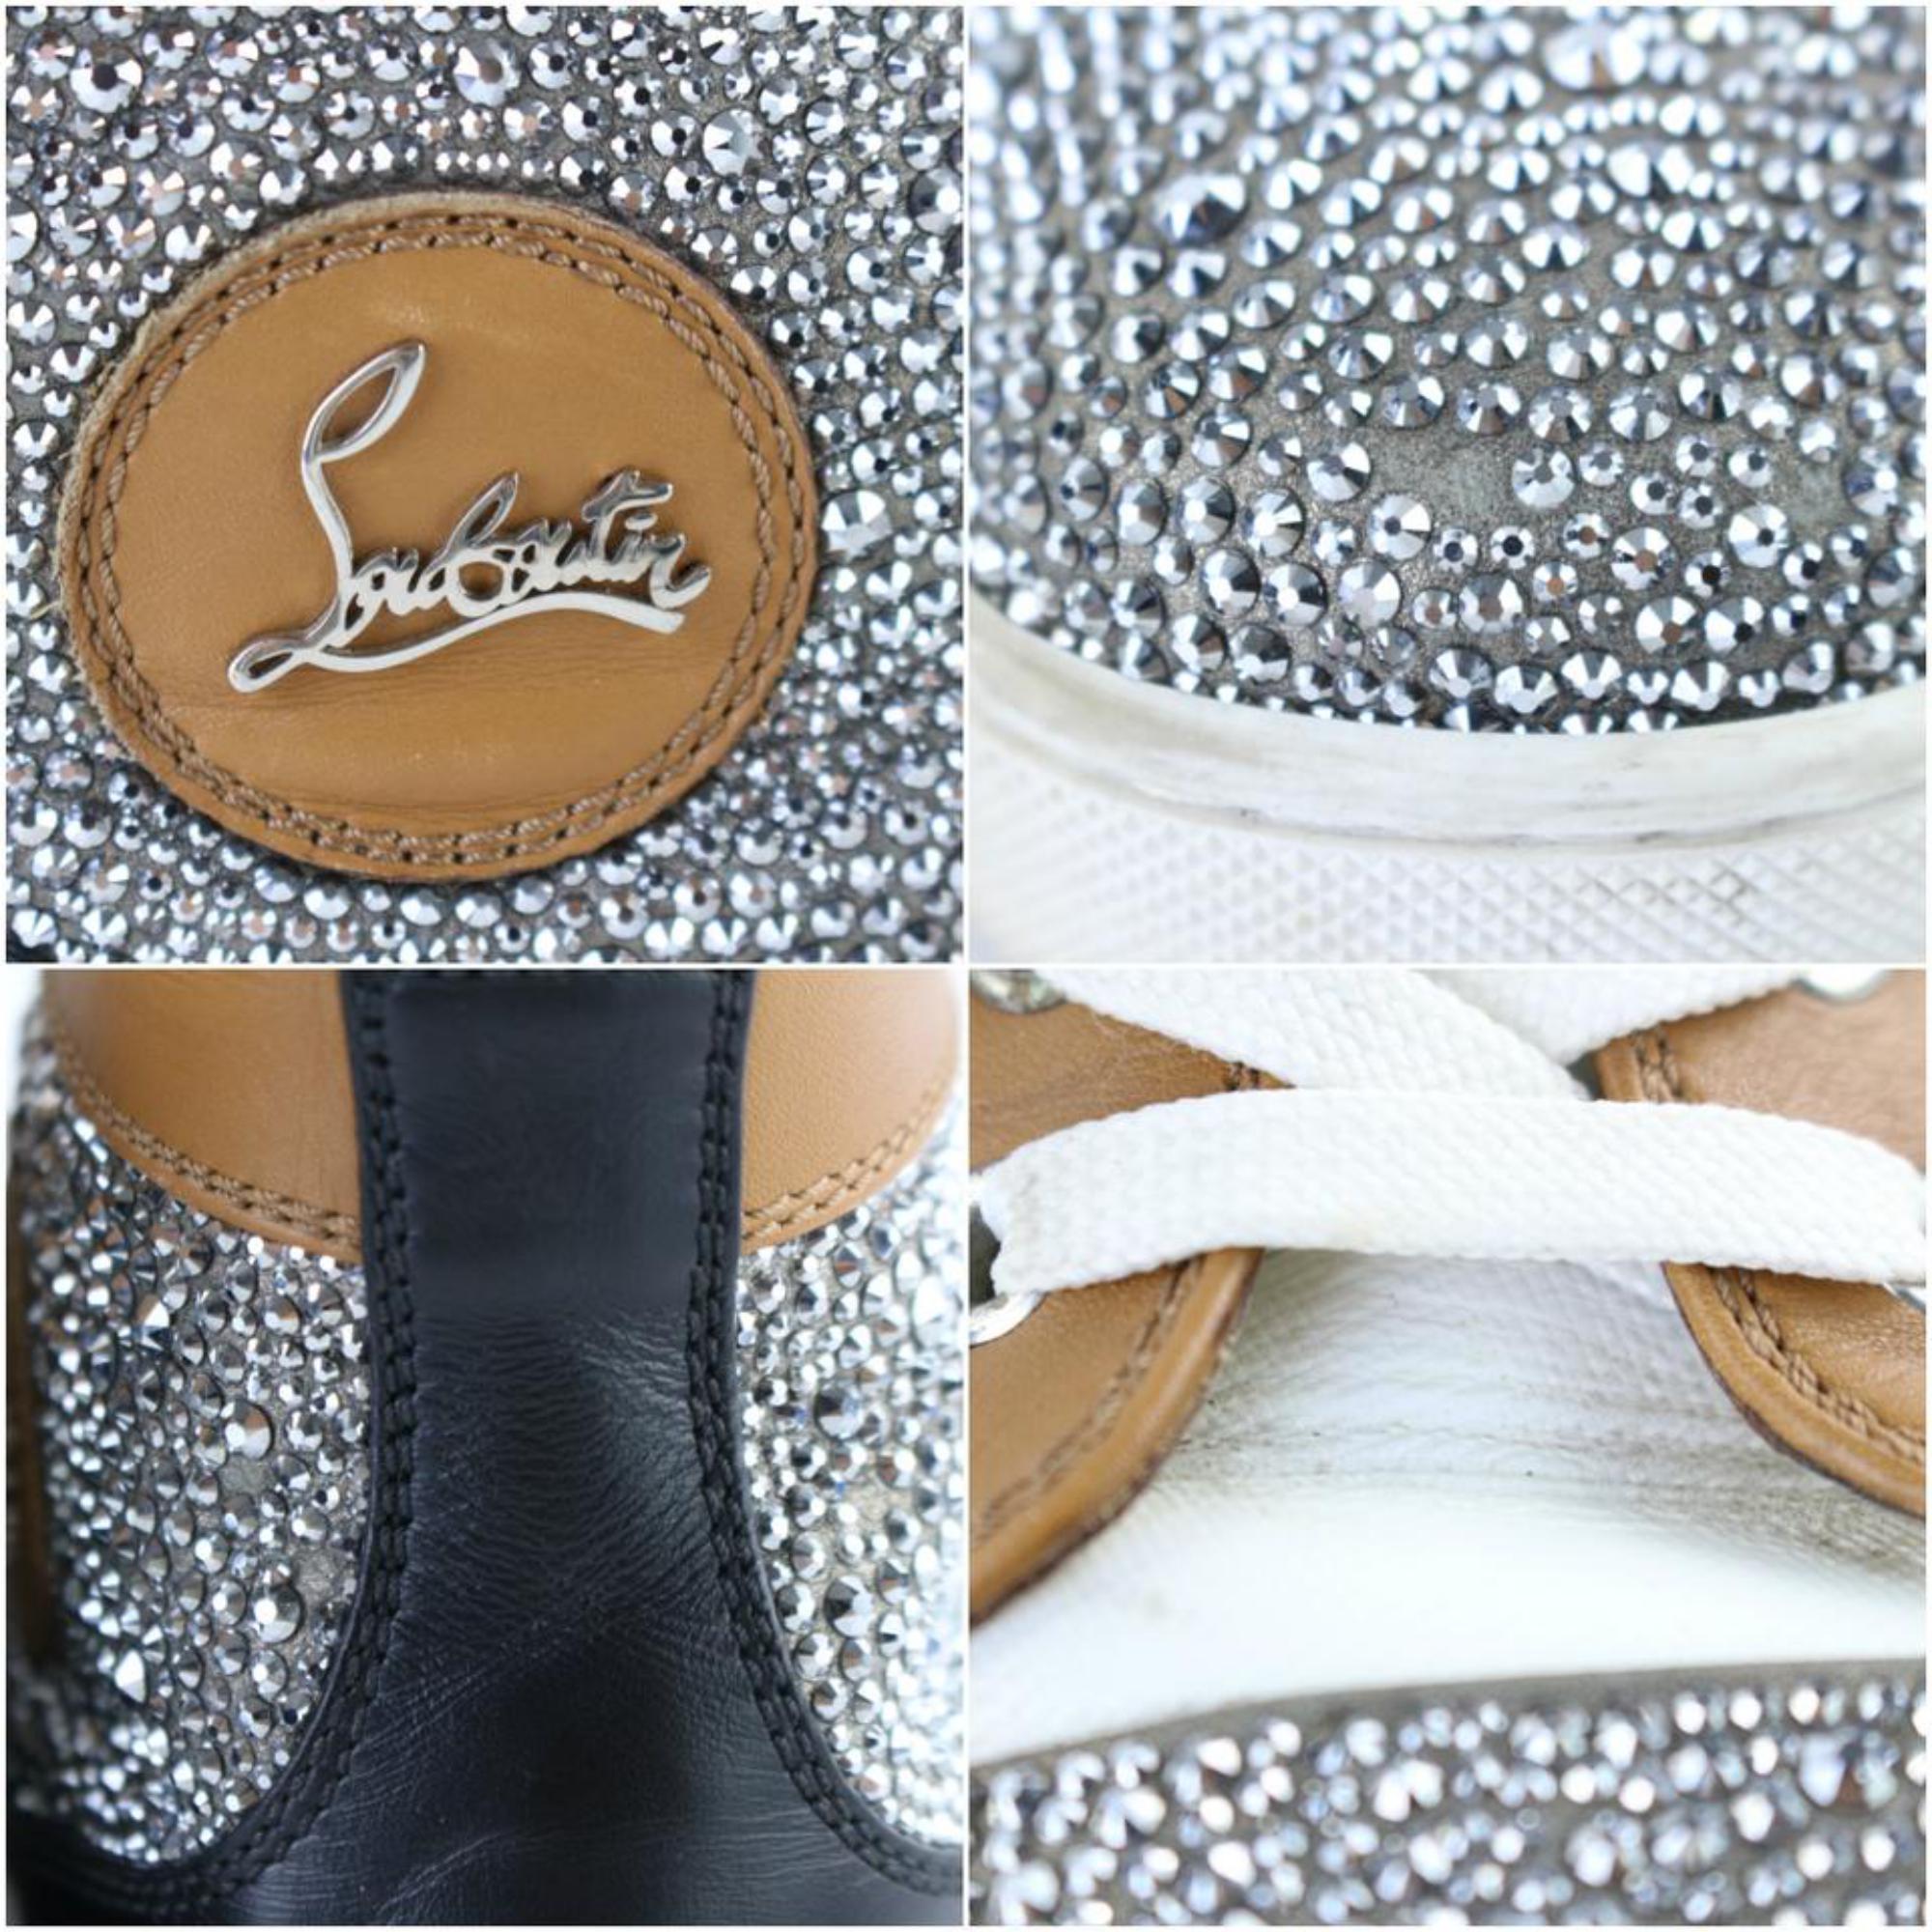 sparkly louboutin boots